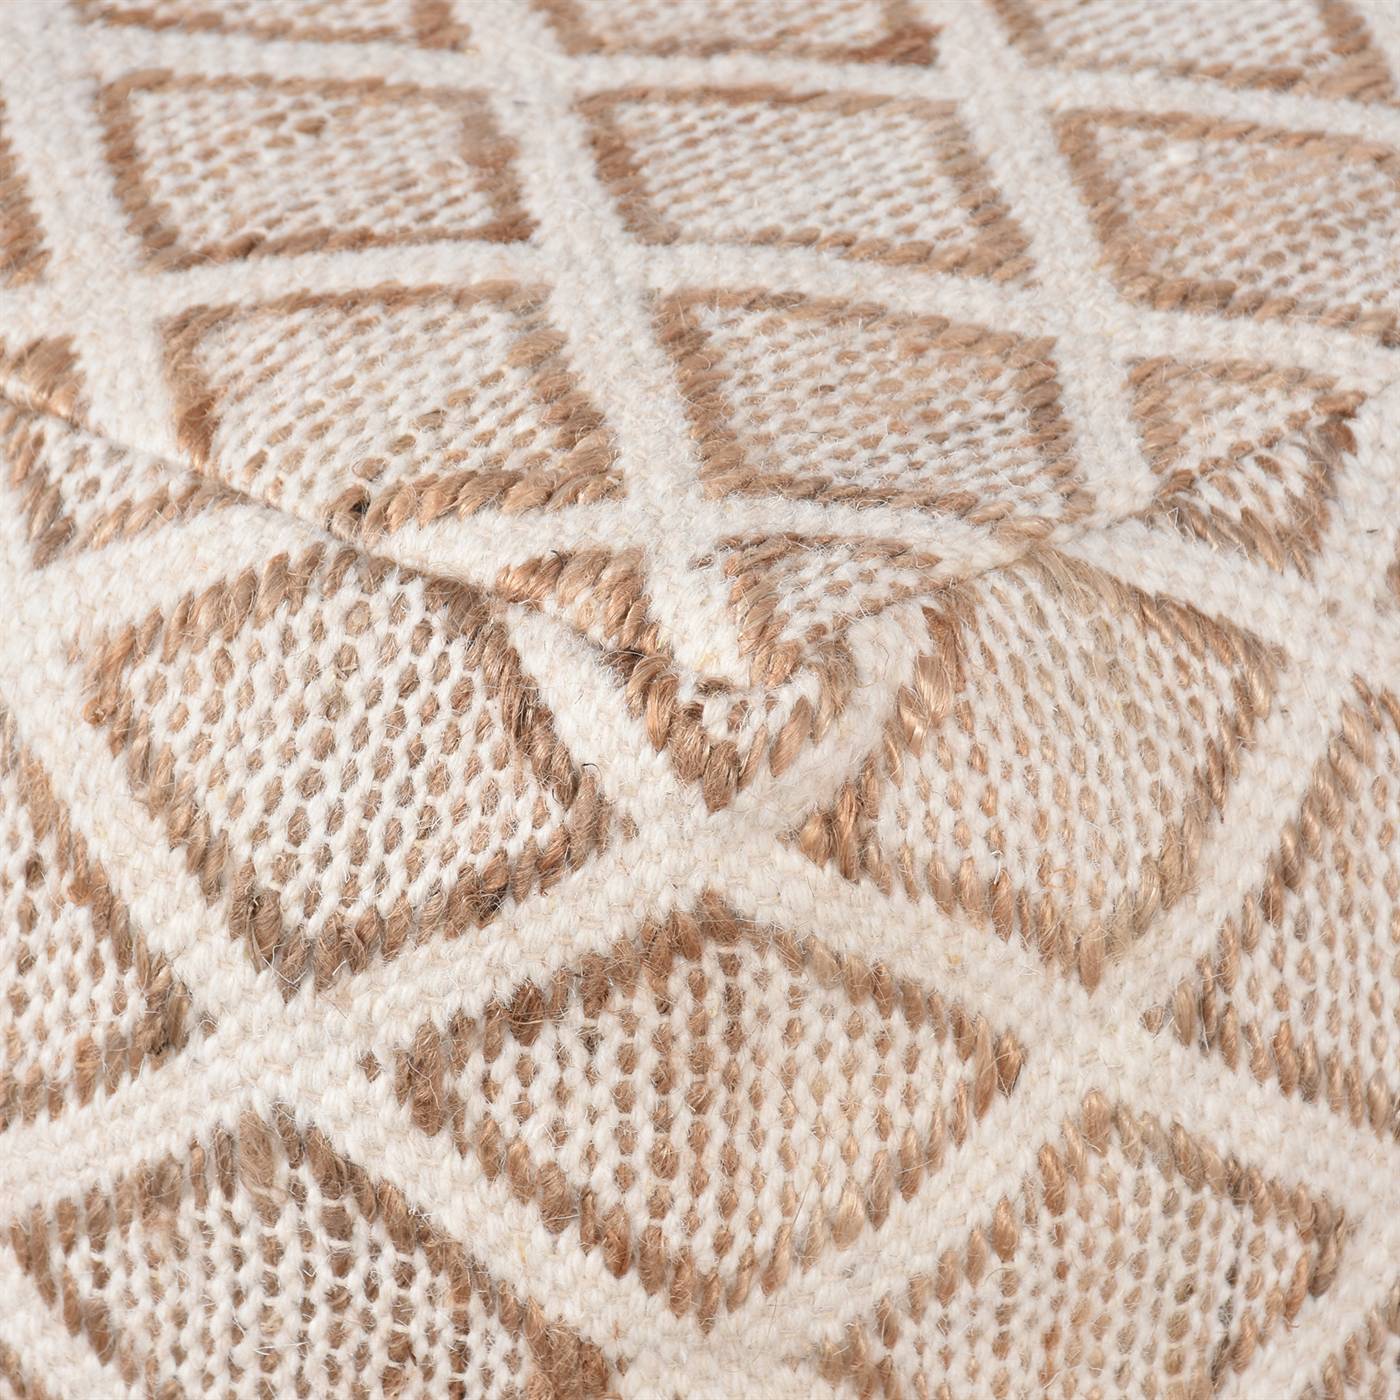 Aterno Pouf, 40x40x40 cm, Natural, Natural White, Jute, Wool, Hand Woven, Pitloom, Flat Weave